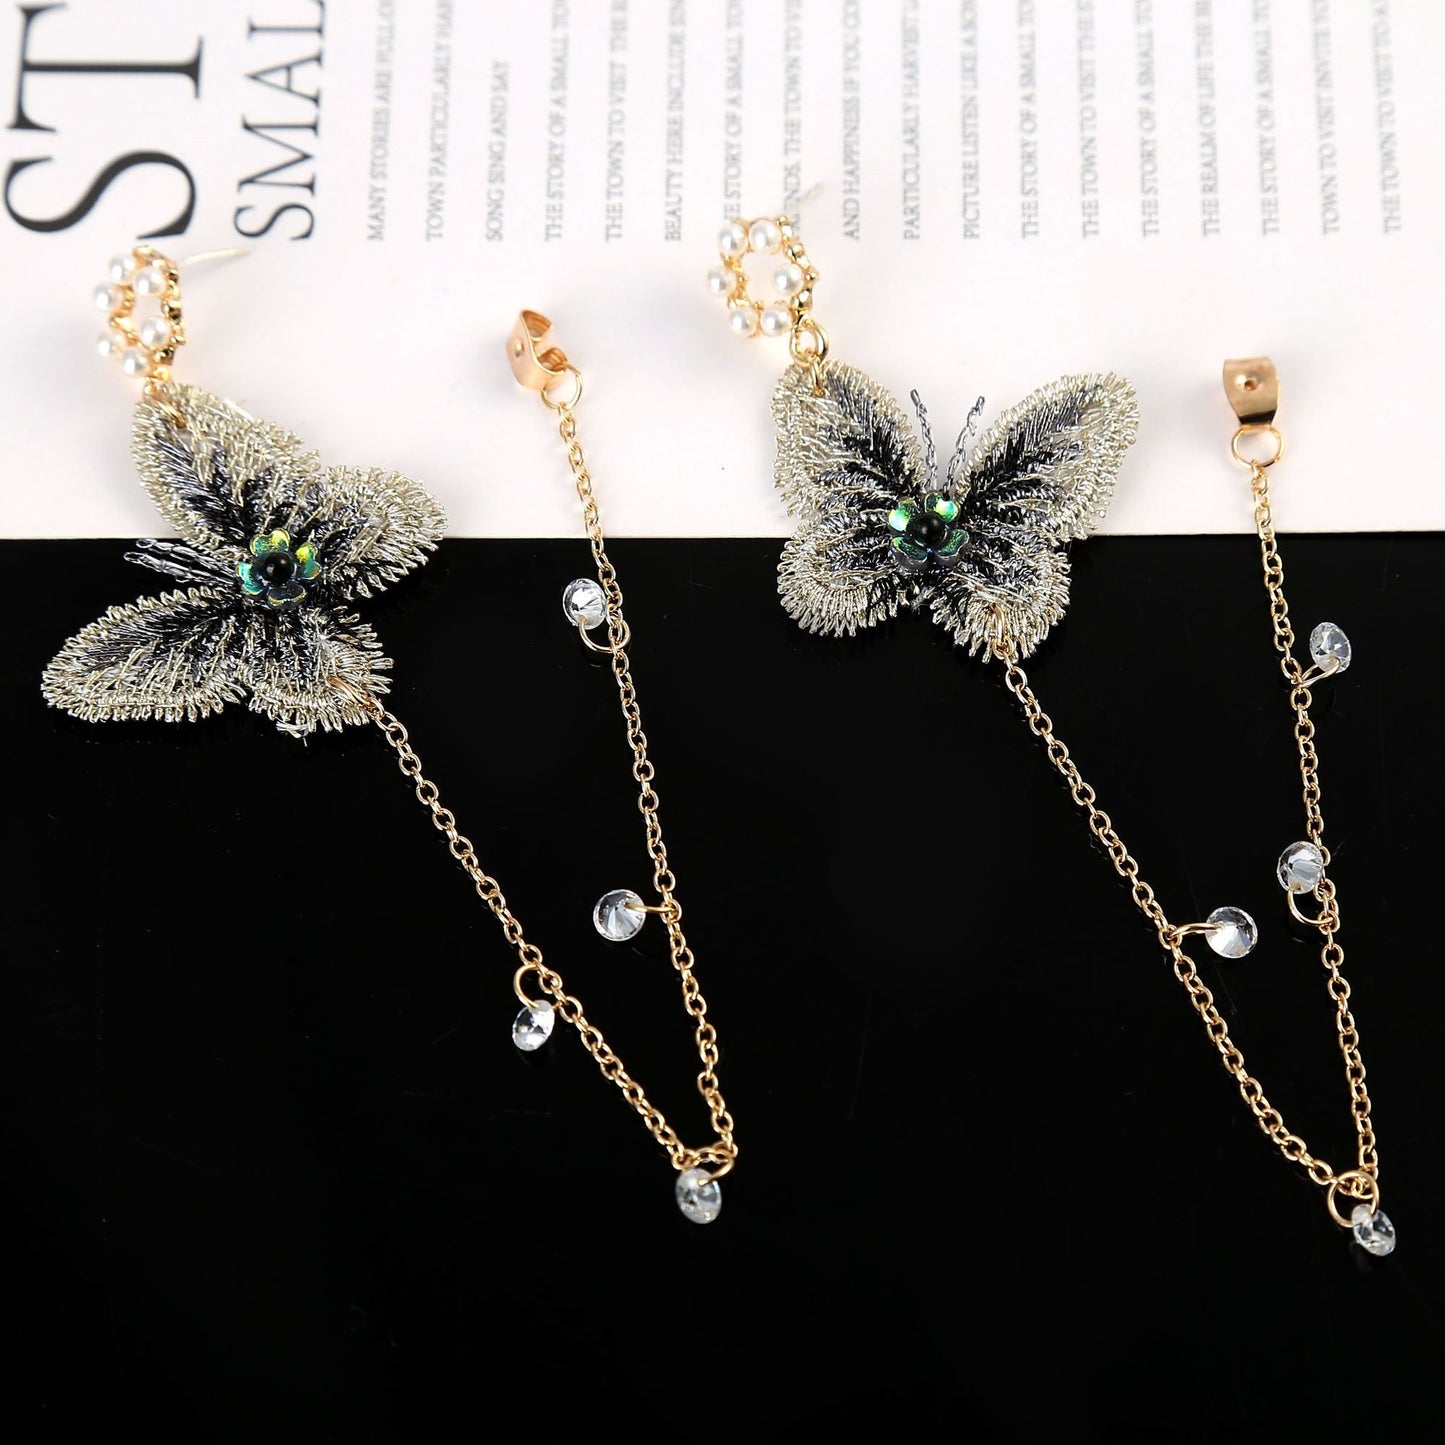 A - Embroidered Lace Butterfly Crystal Rhinestone Alloy Dangling Earrings Gift Women Birthday Elegant Modern Fashion